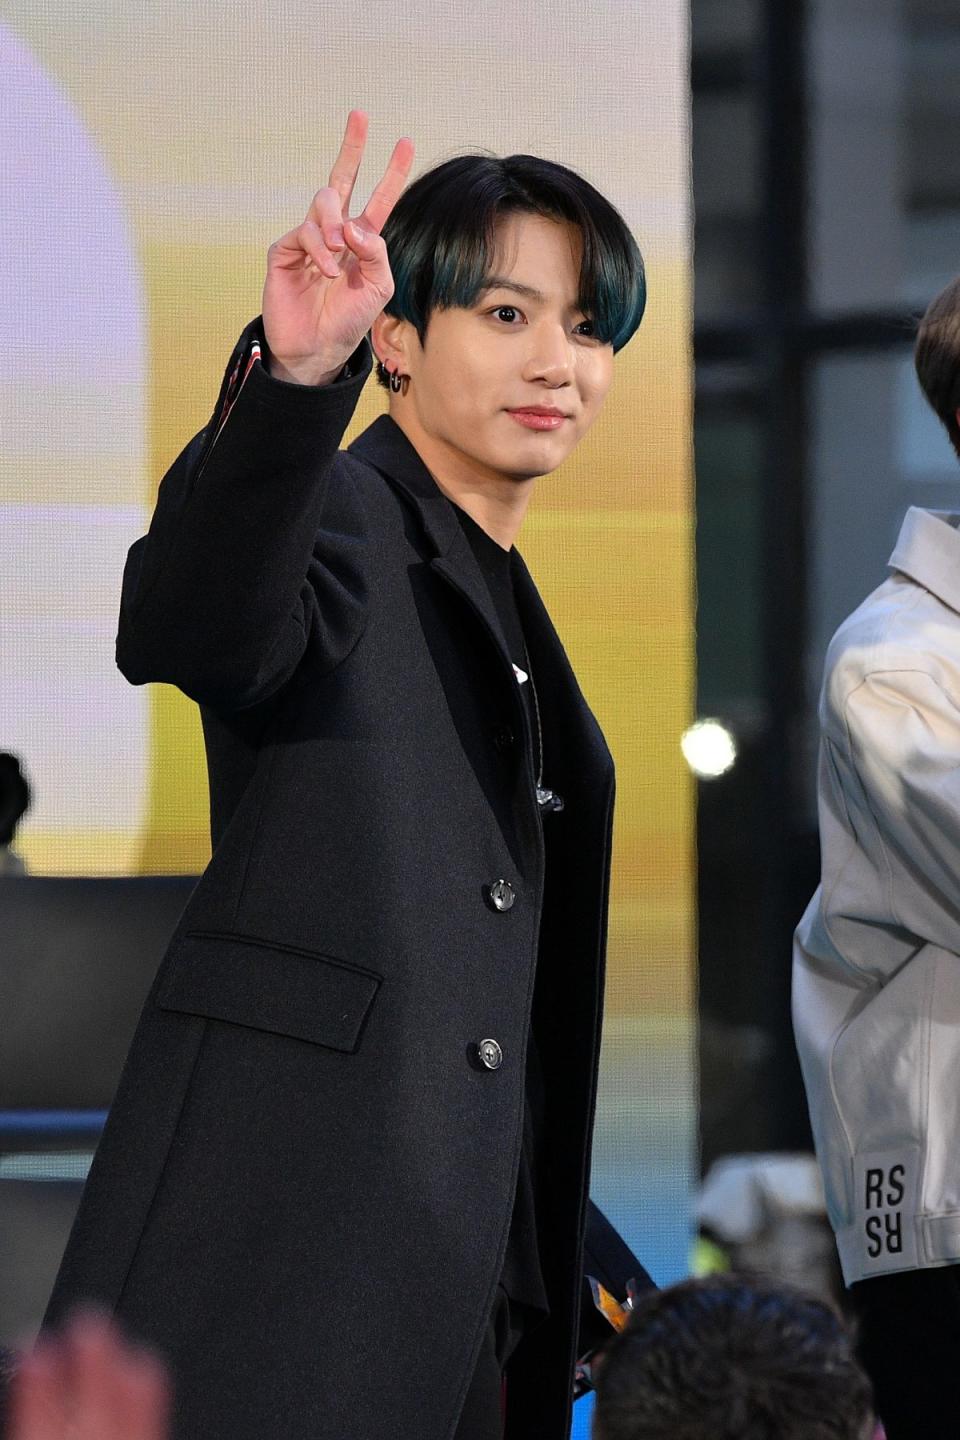 NEW YORK, NEW YORK - FEBRUARY 21: Jungkook of the K-pop boy band BTS visits the 'Today' Show at Rockefeller Plaza on February 21, 2020 in New York City. (Photo by Dia Dipasupil/Getty Images)